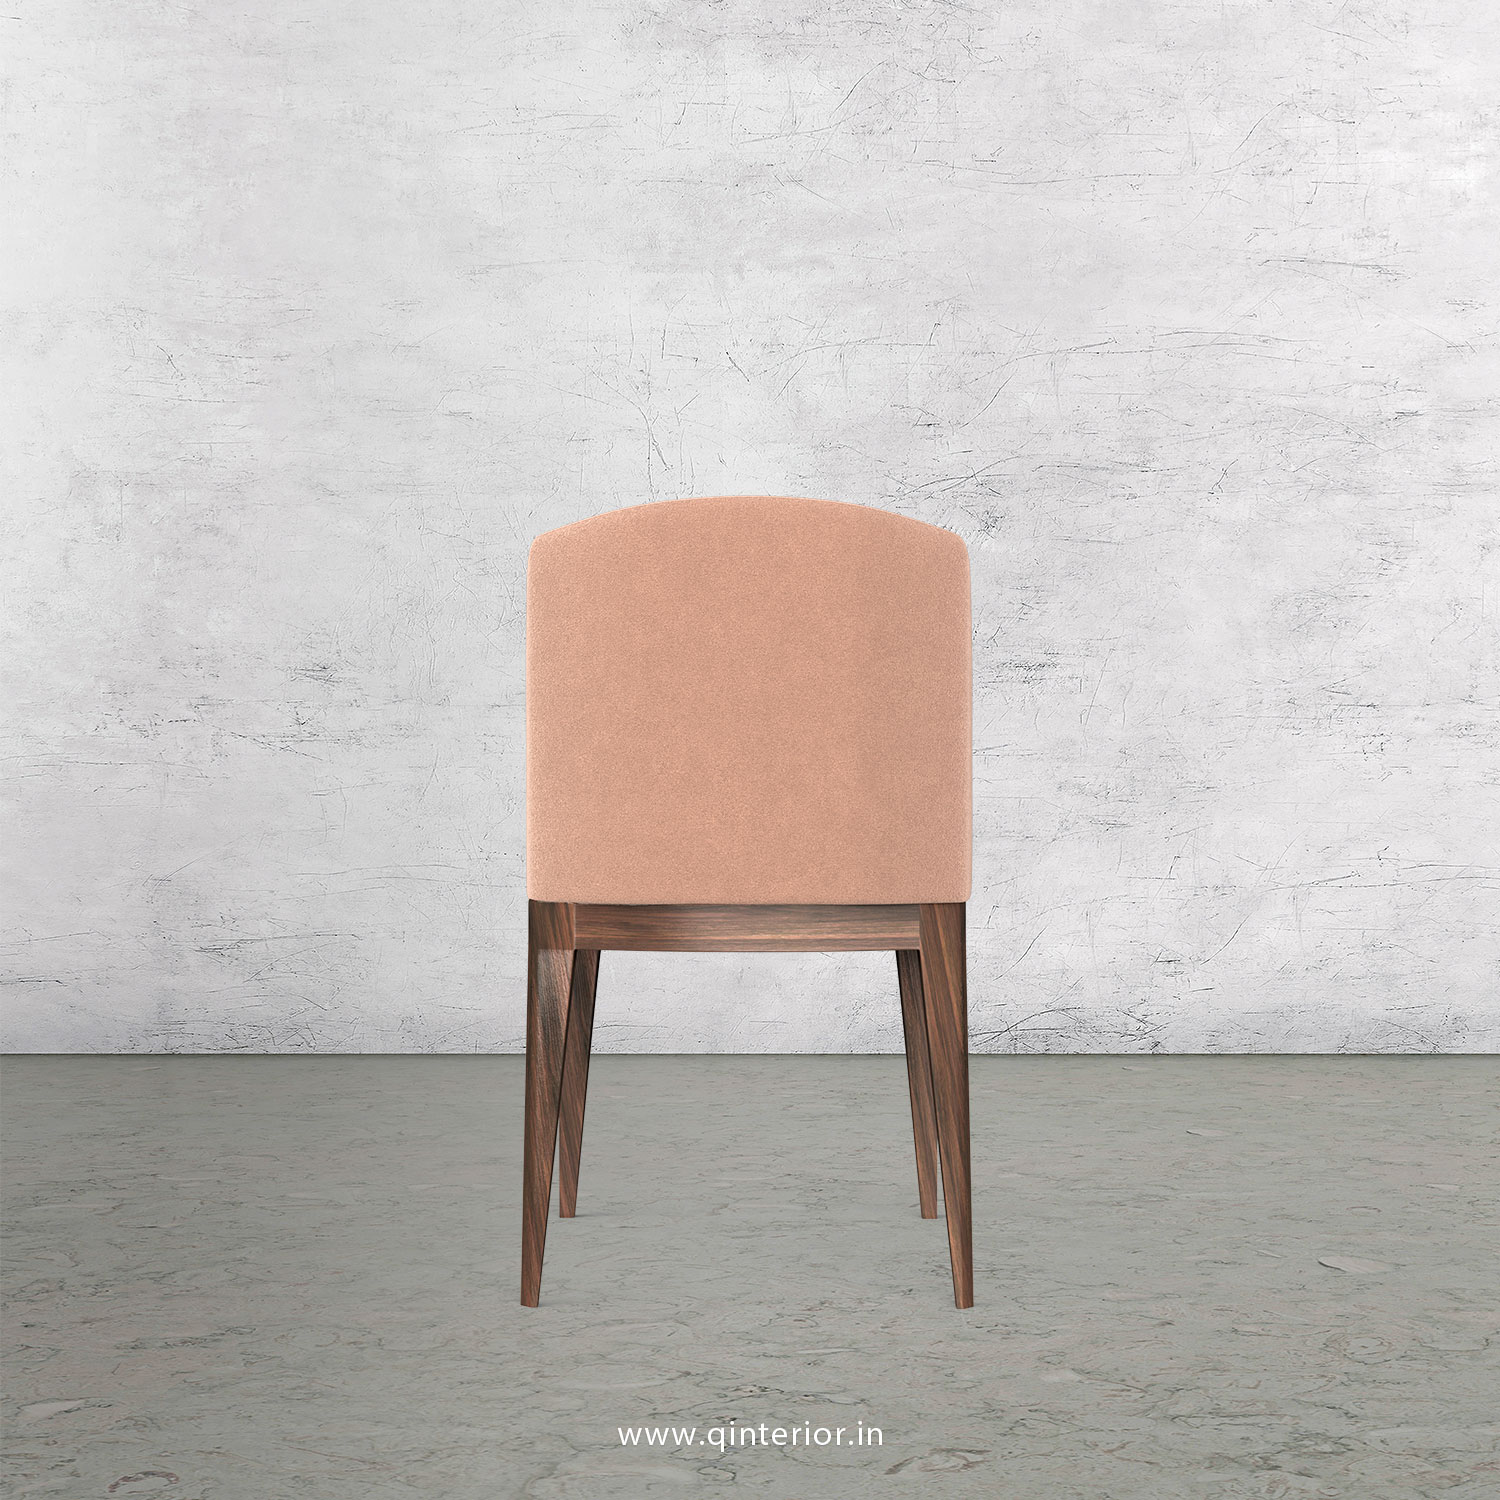 Cario Dining Chair in Velvet Fabric - DCH001 VL16